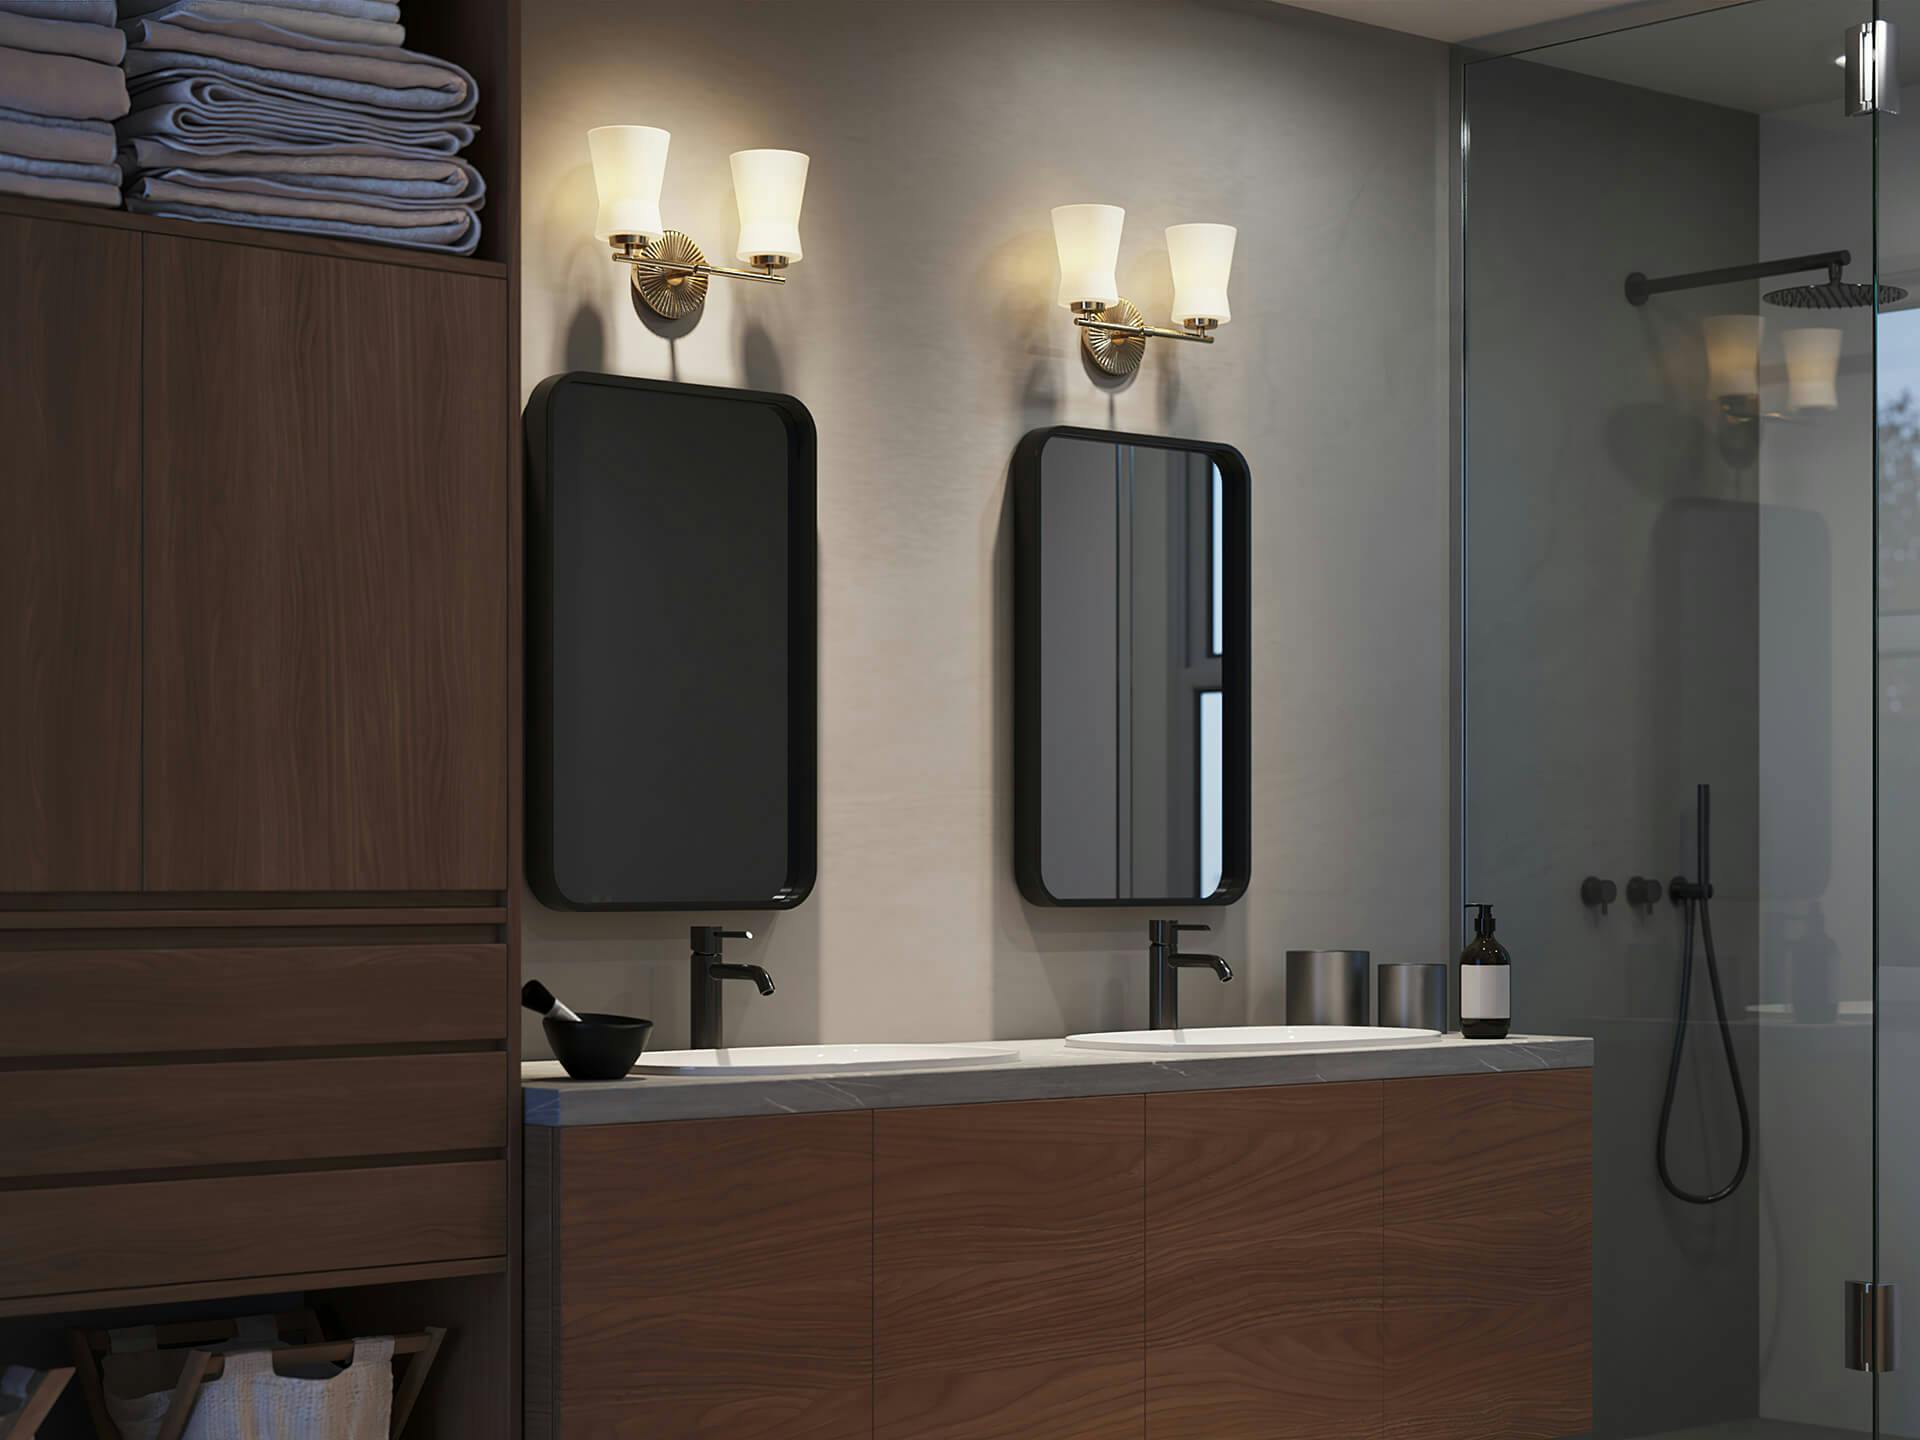 Nighttime bathroom scene with two mirrors, a Brianne sconce shining above each